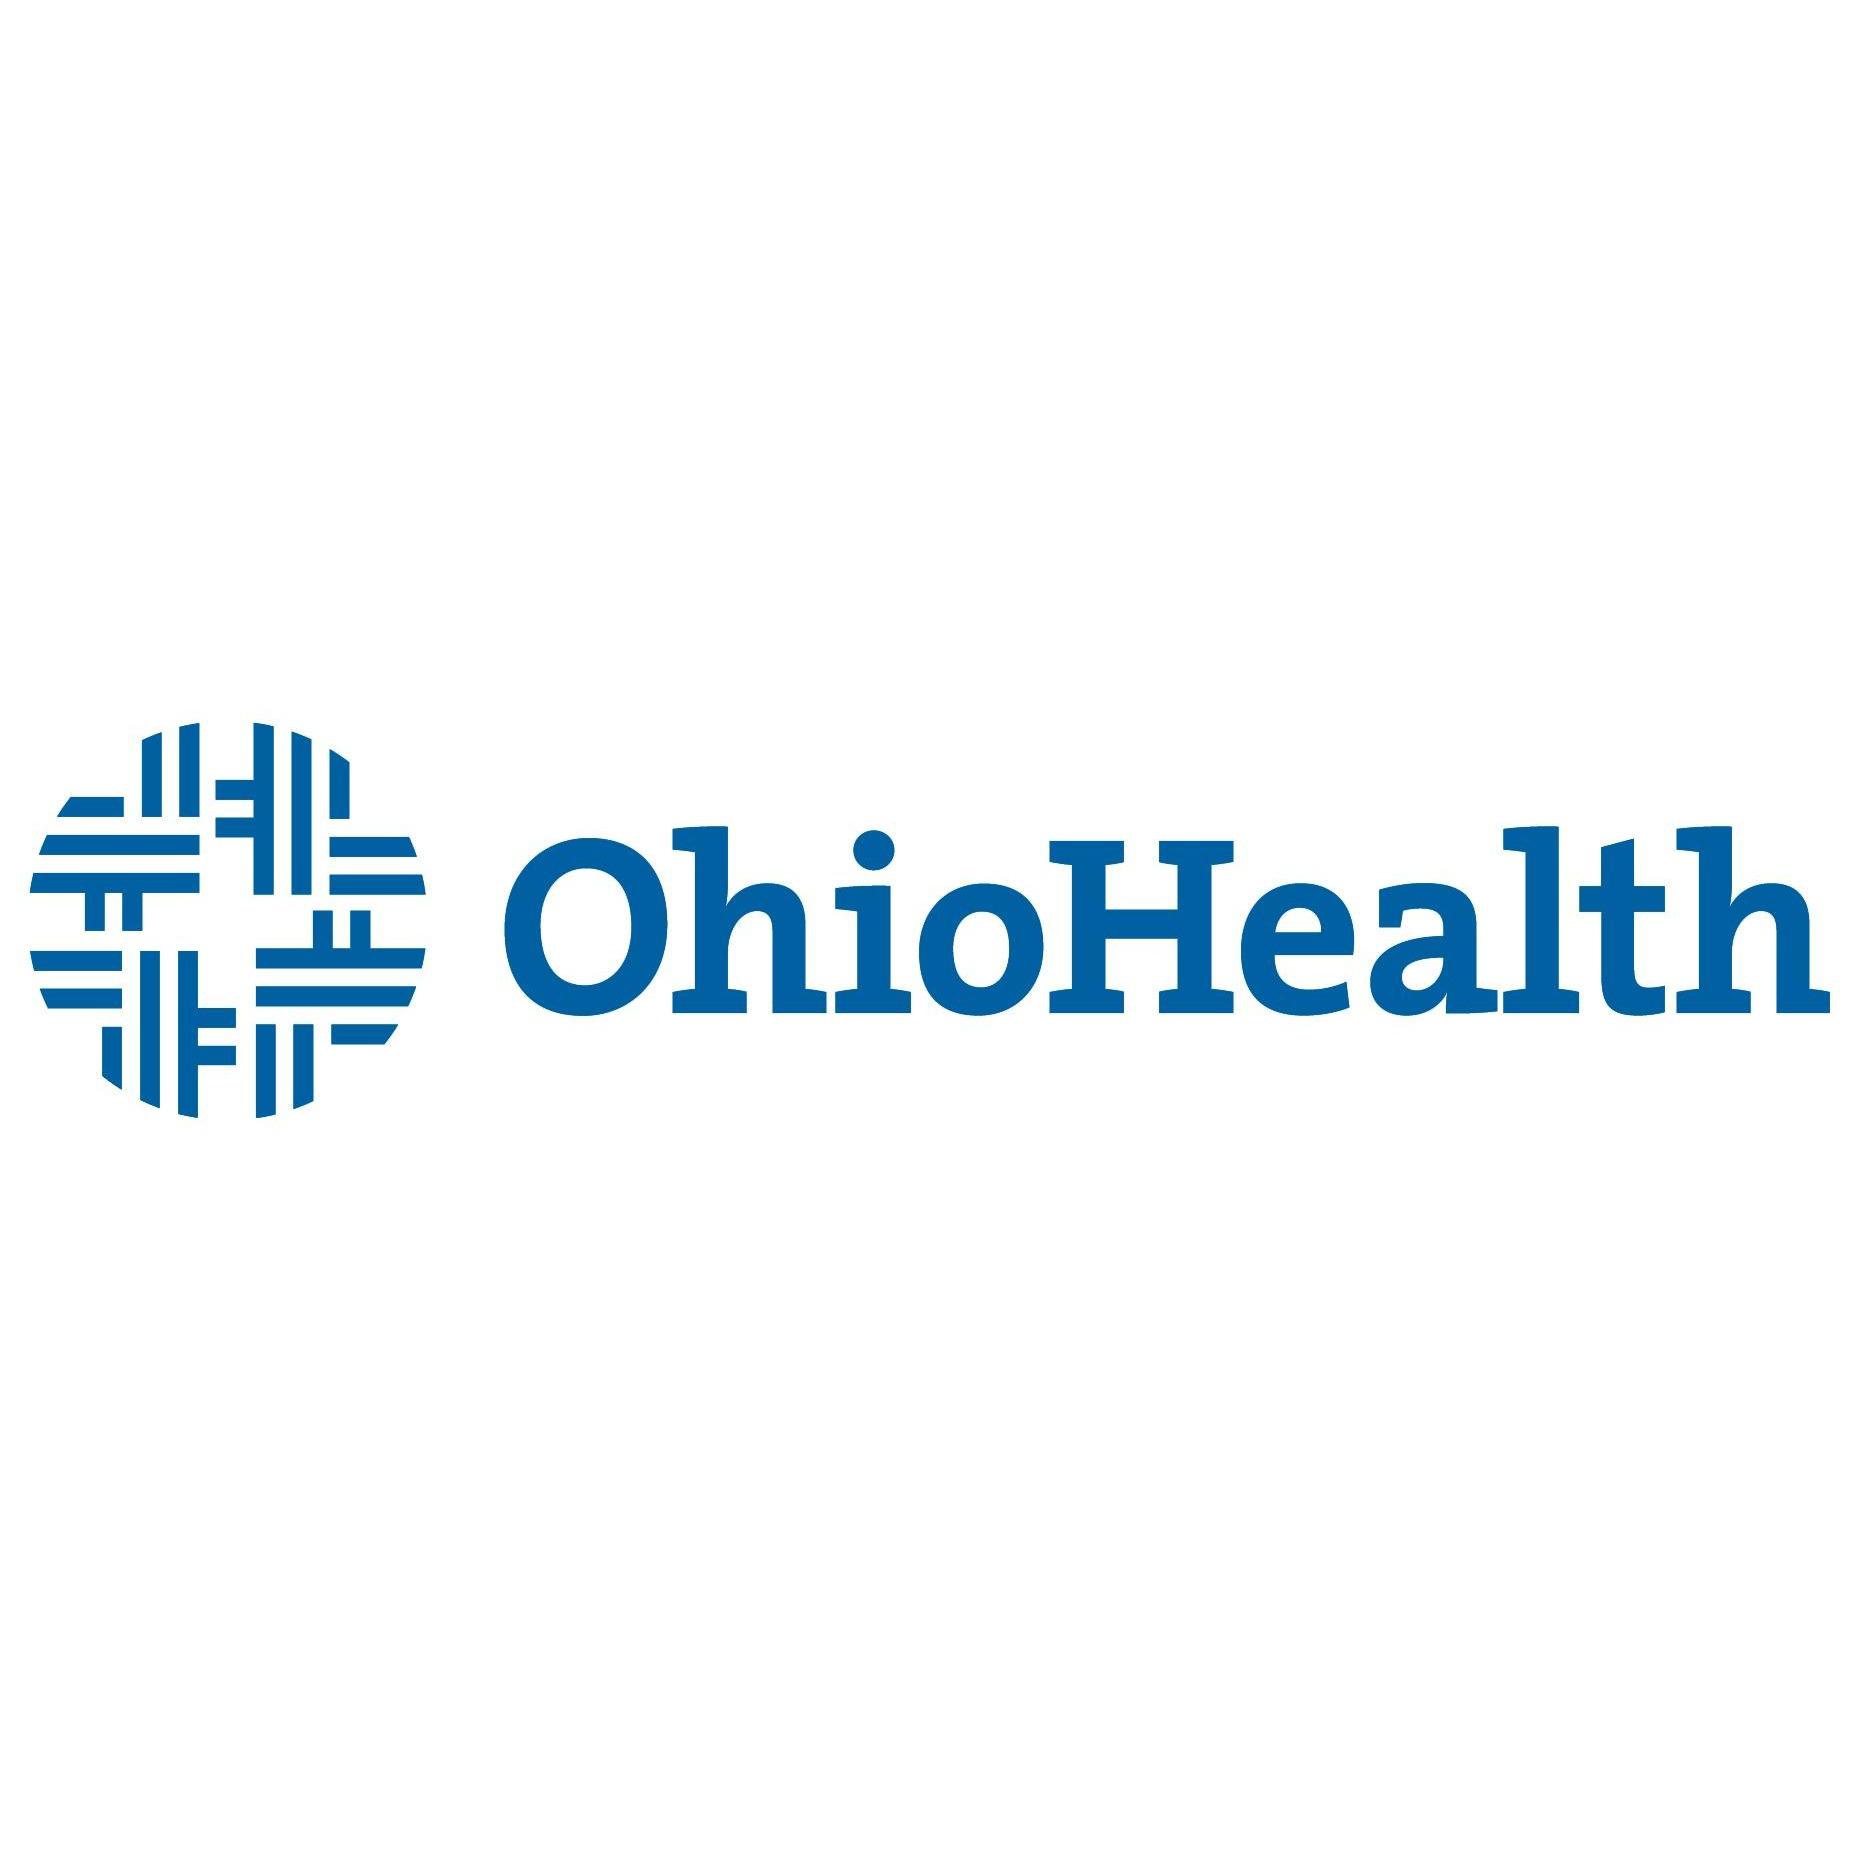 OhioHealth Physician Group Ear, Nose and Throat - Marysville, OH 43040 - (614)788-2510 | ShowMeLocal.com